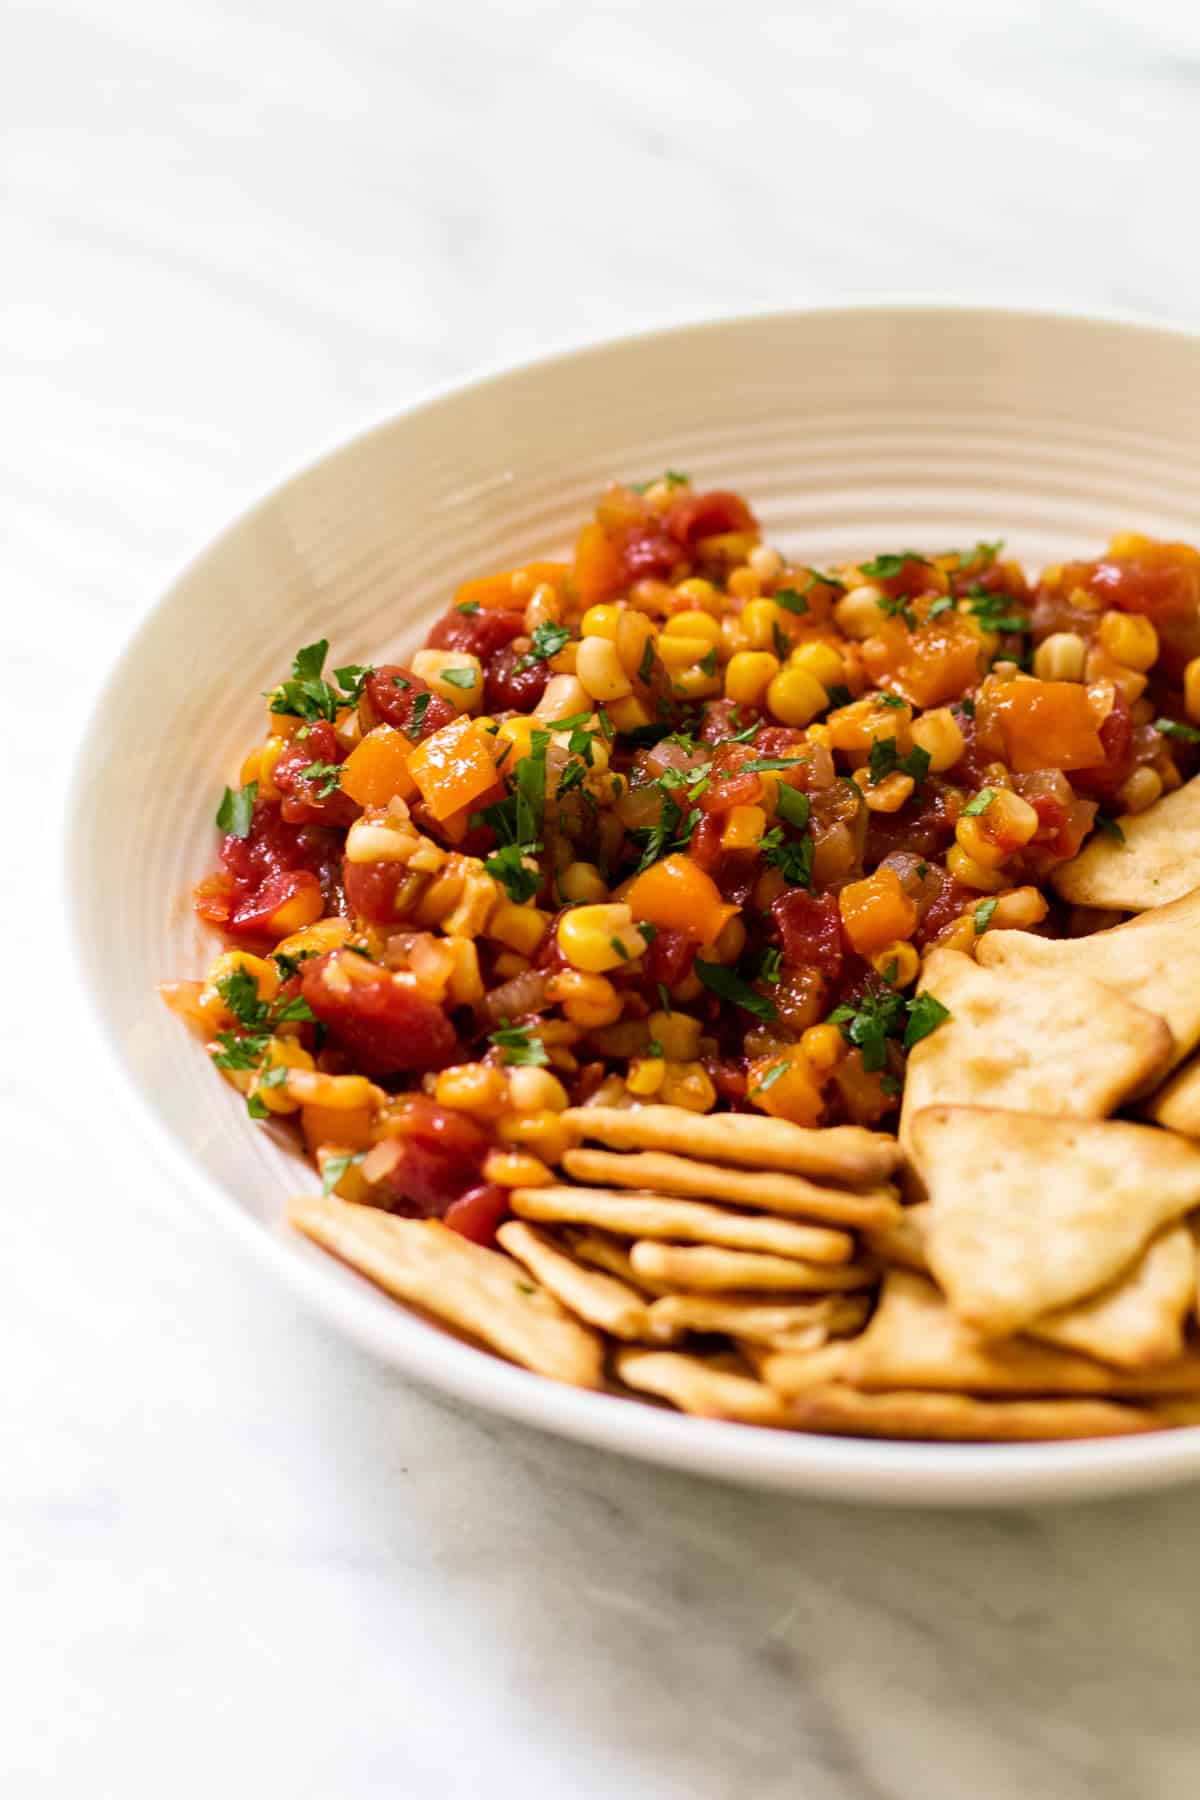 corn relish in a bowl with crackers.